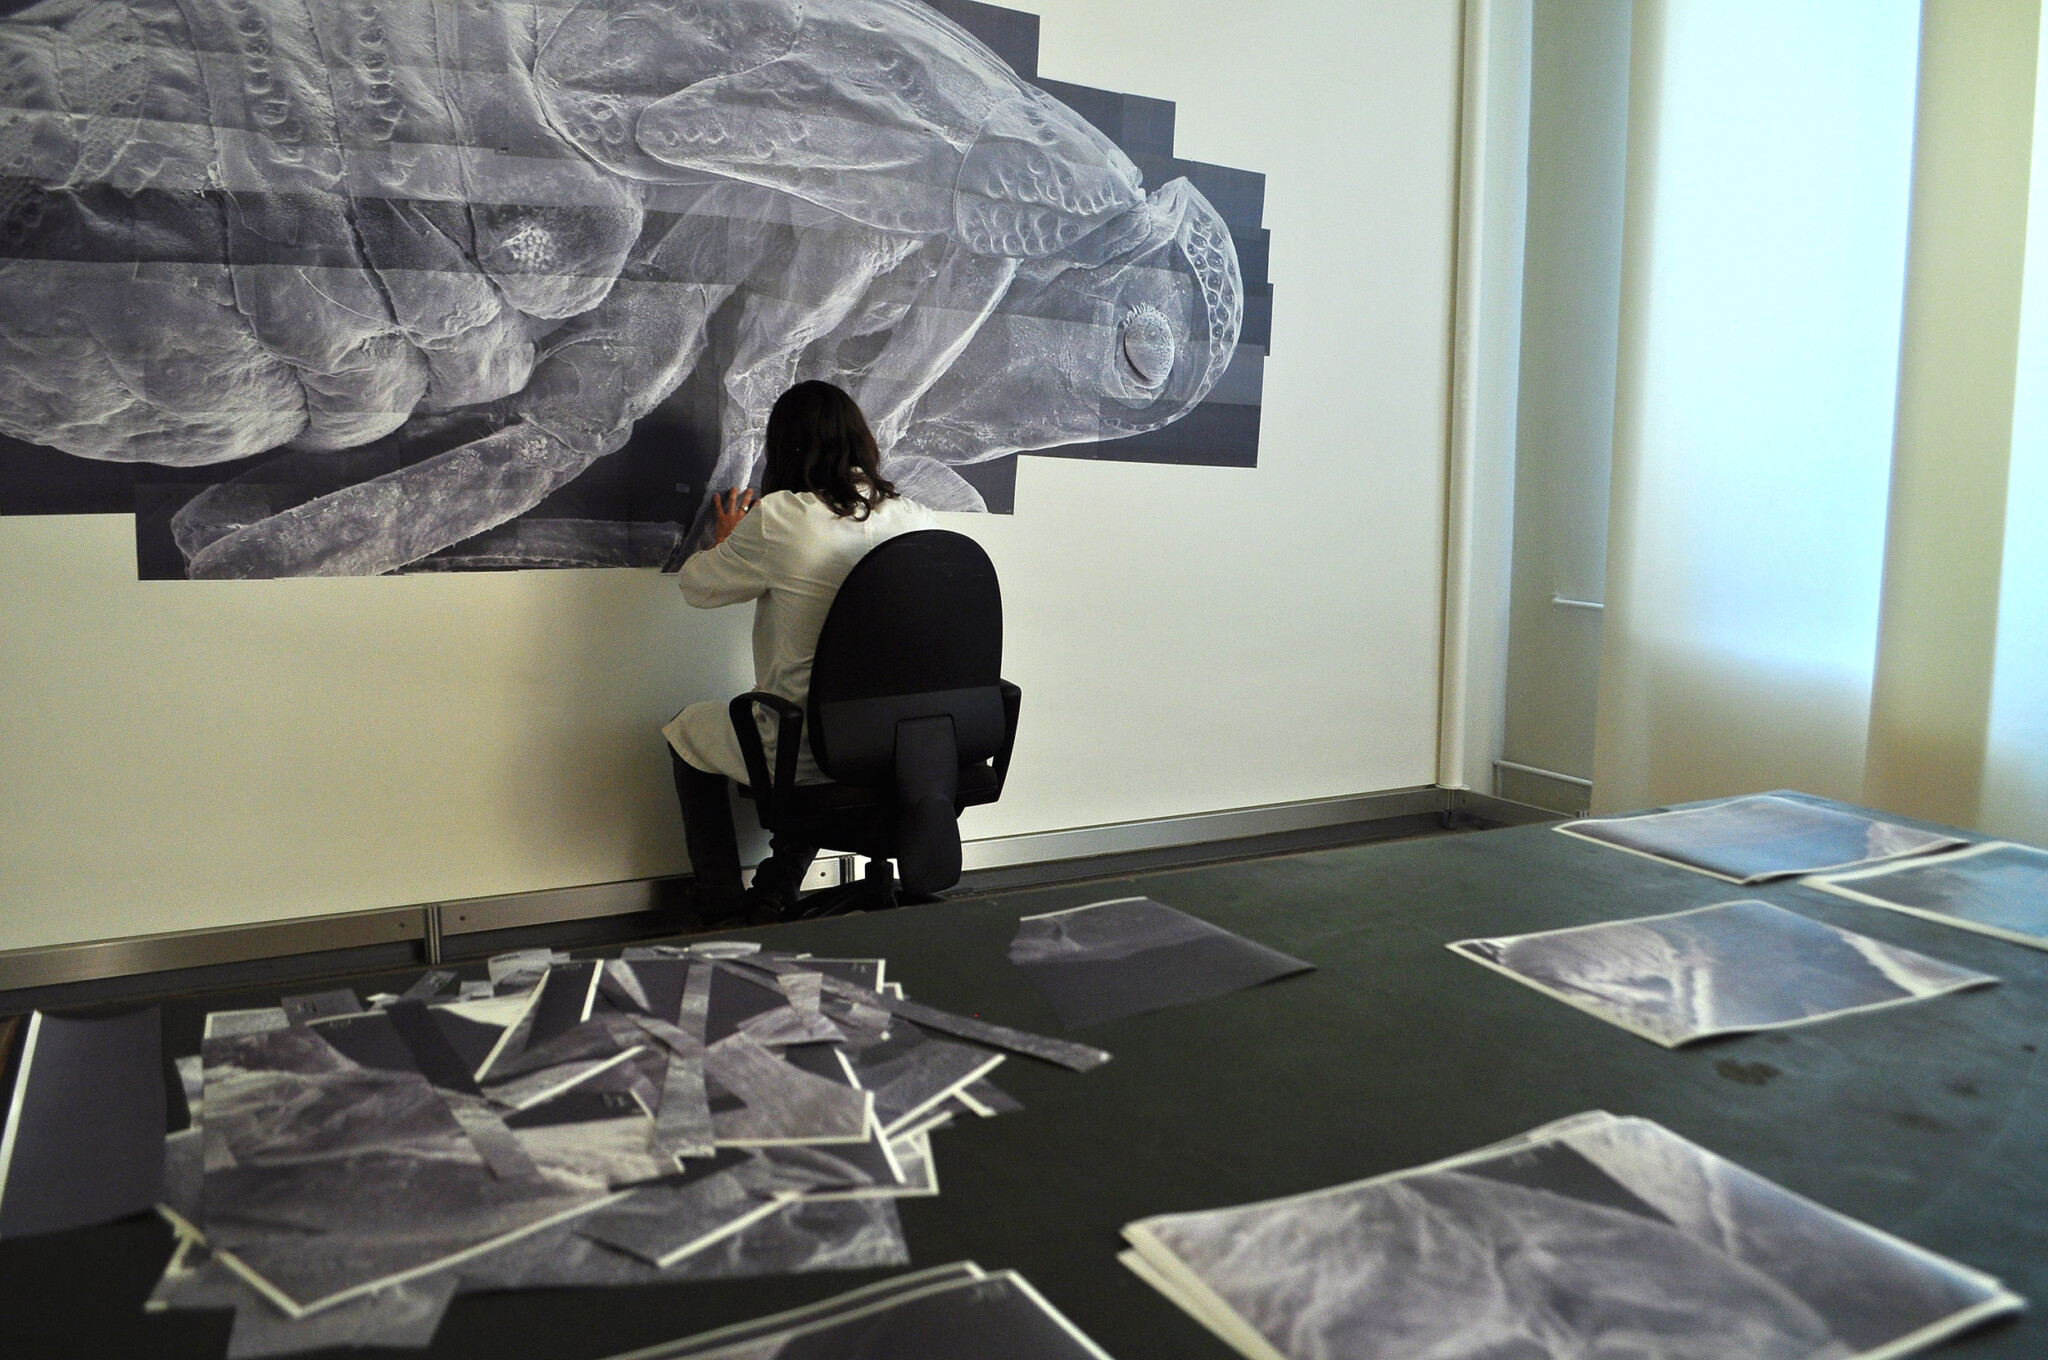 Working on the SEM collage, Natural History Museum, Berlin (2014). Photo: Julia Pietschmann.